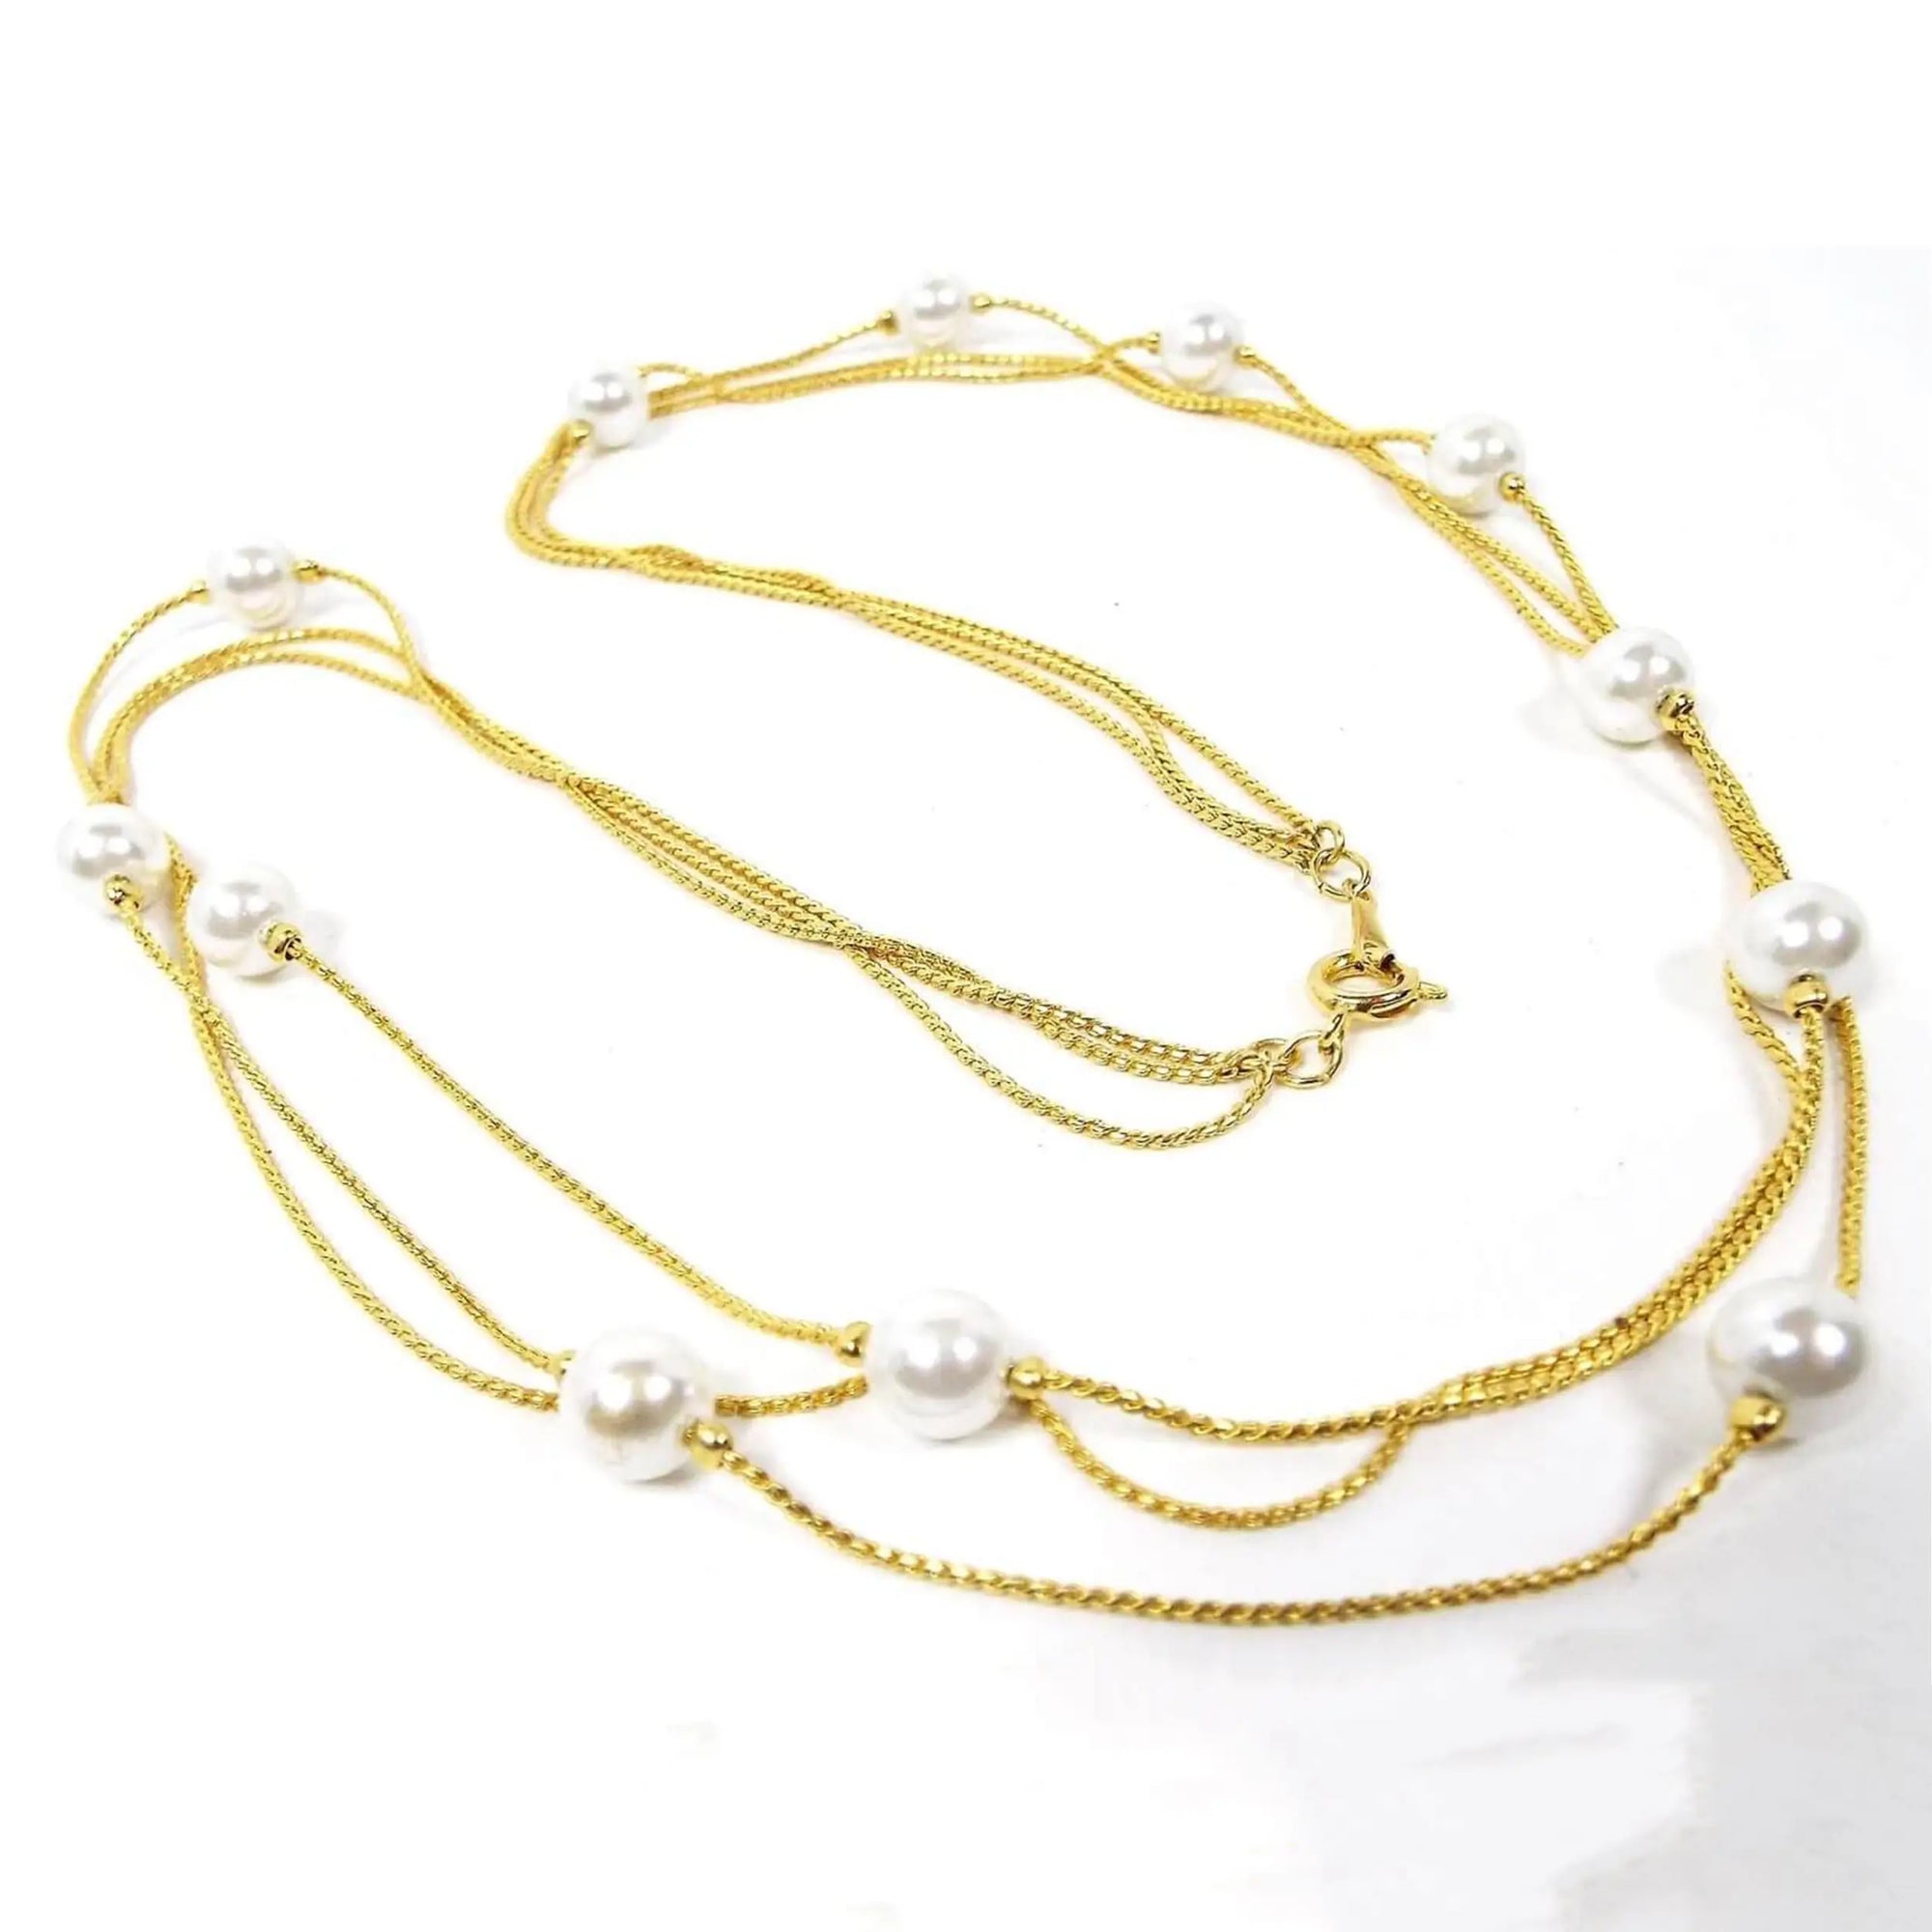 Retro vintage faux pearl beaded chain necklace. It has three thin strands of serpentine chain in gold tone color metal. The imitation pearl beads are scattered here and there throughout the necklace and are pearly white plastic. There is a spring ring clasp at the end.